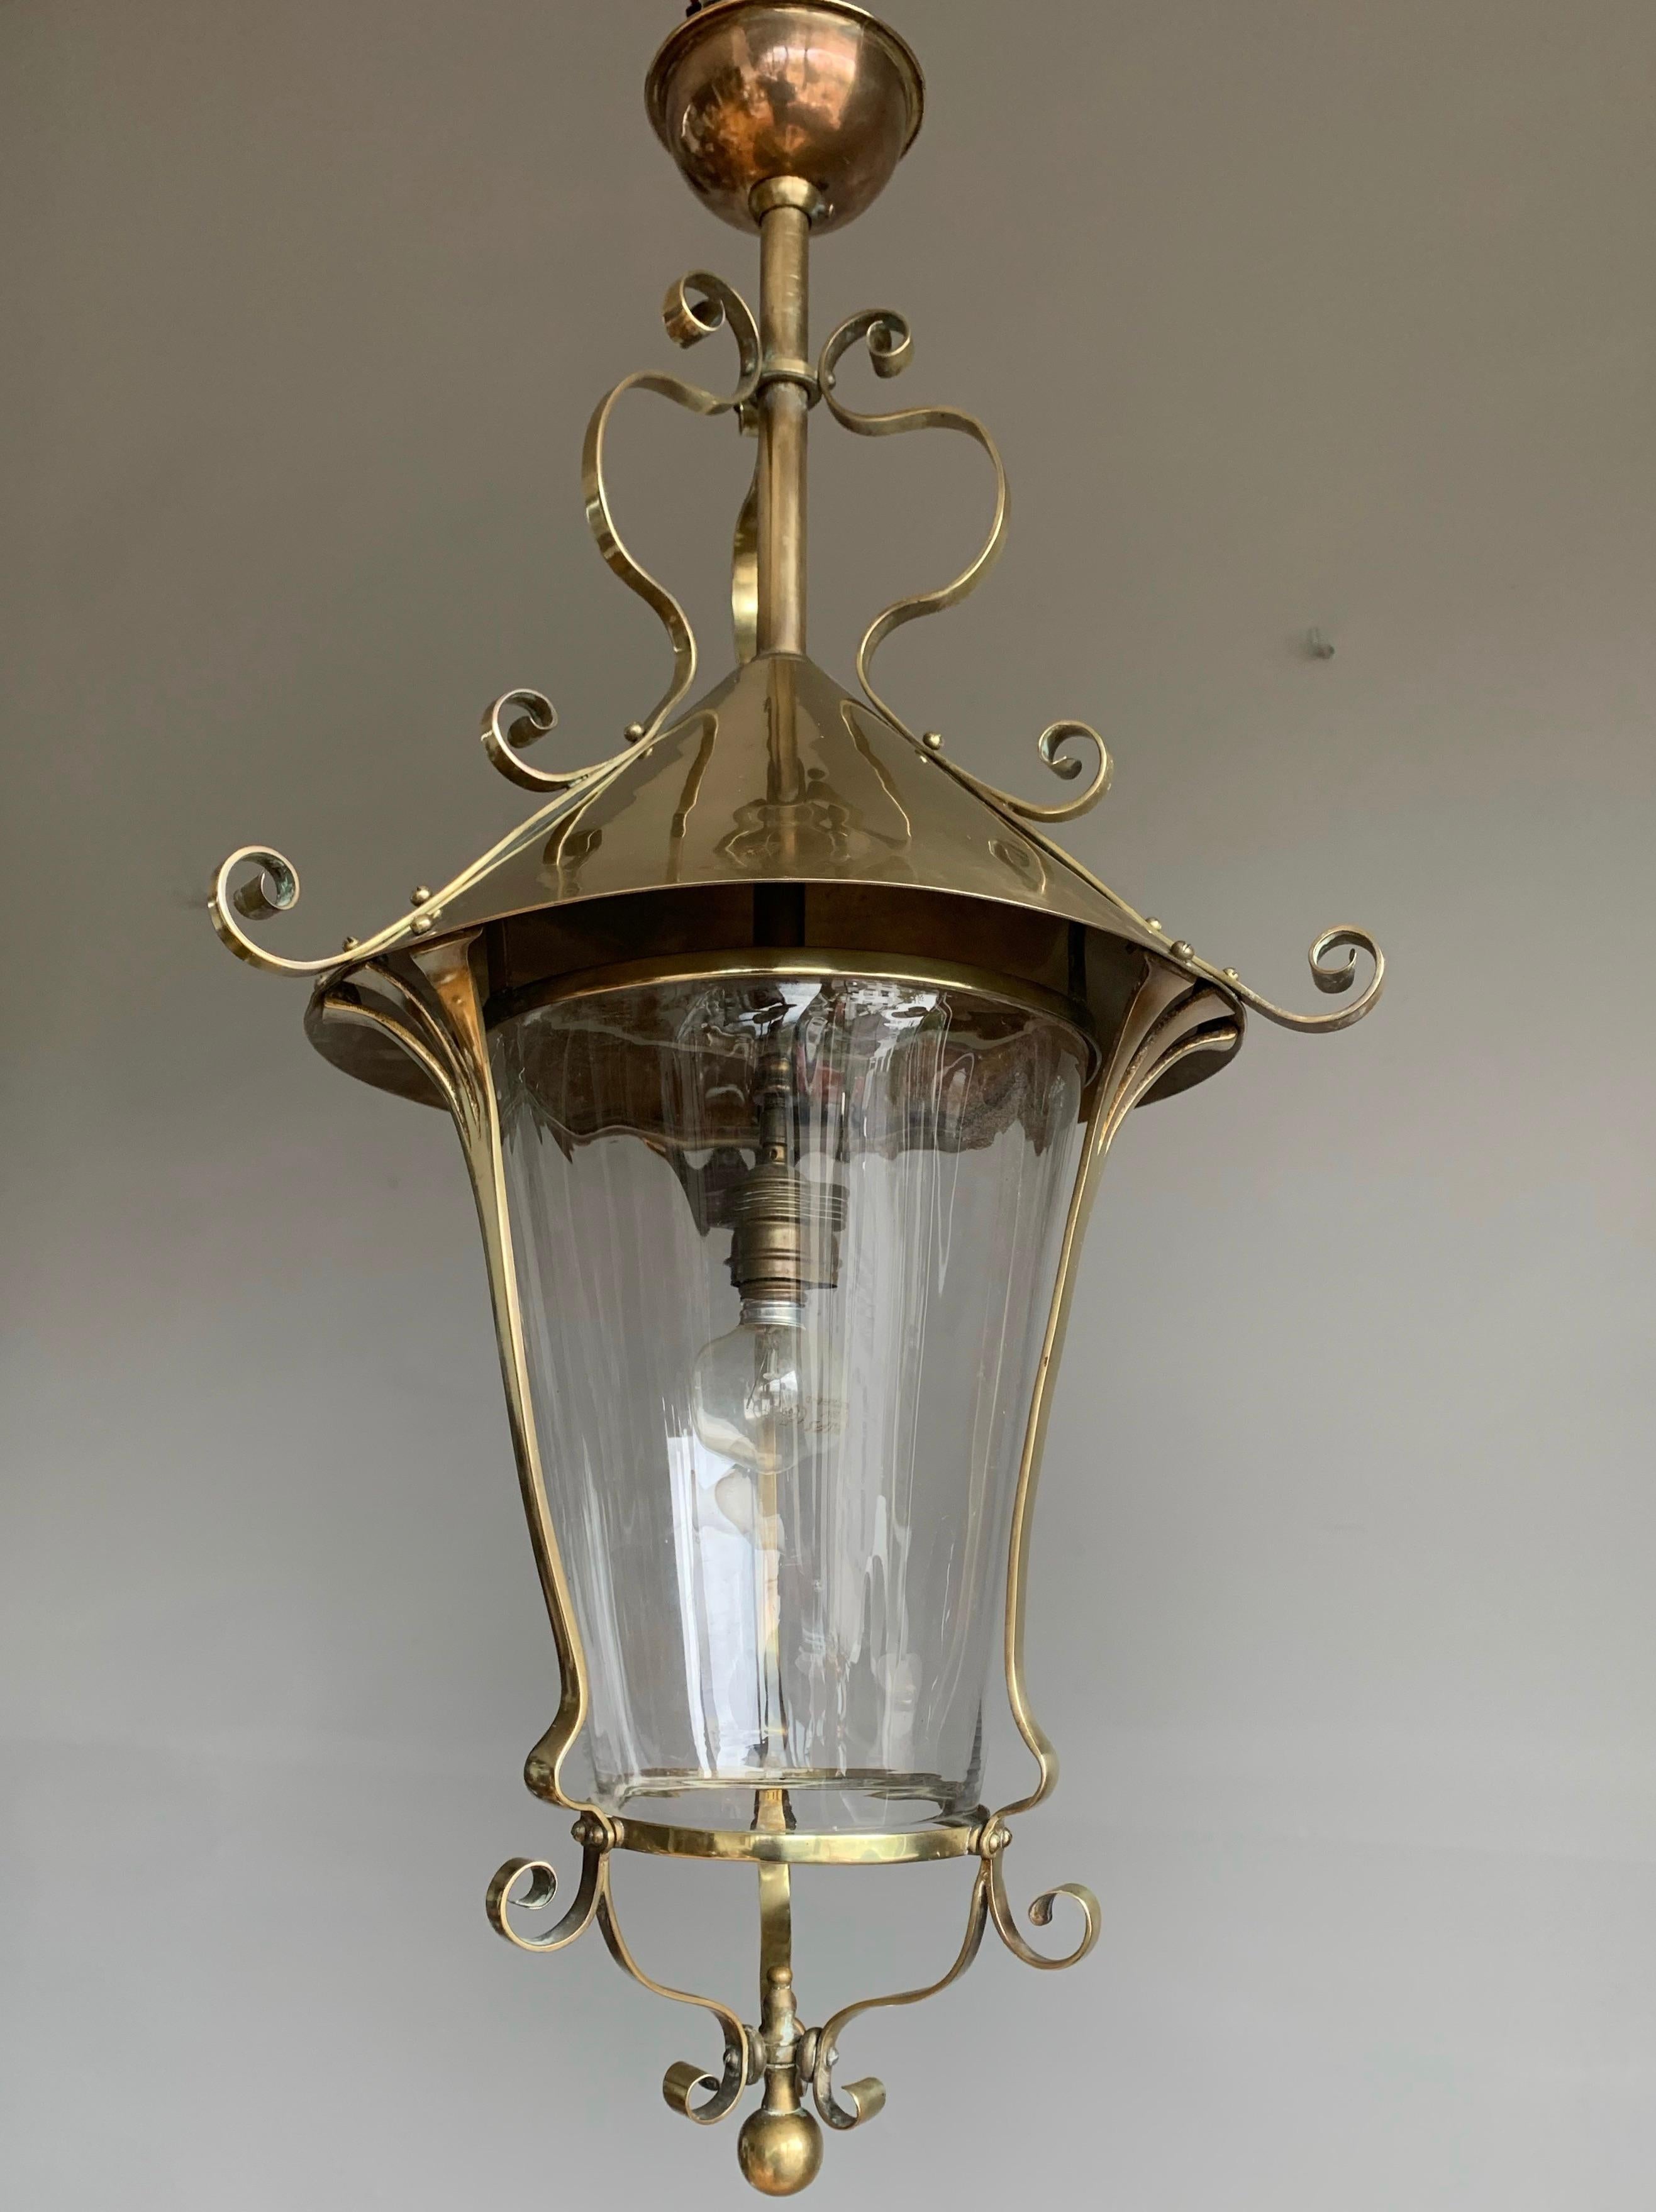 Hand-Crafted Highly Stylish Brass & Clear Glass Arts and Crafts Pendant / Light Fixture, 1910